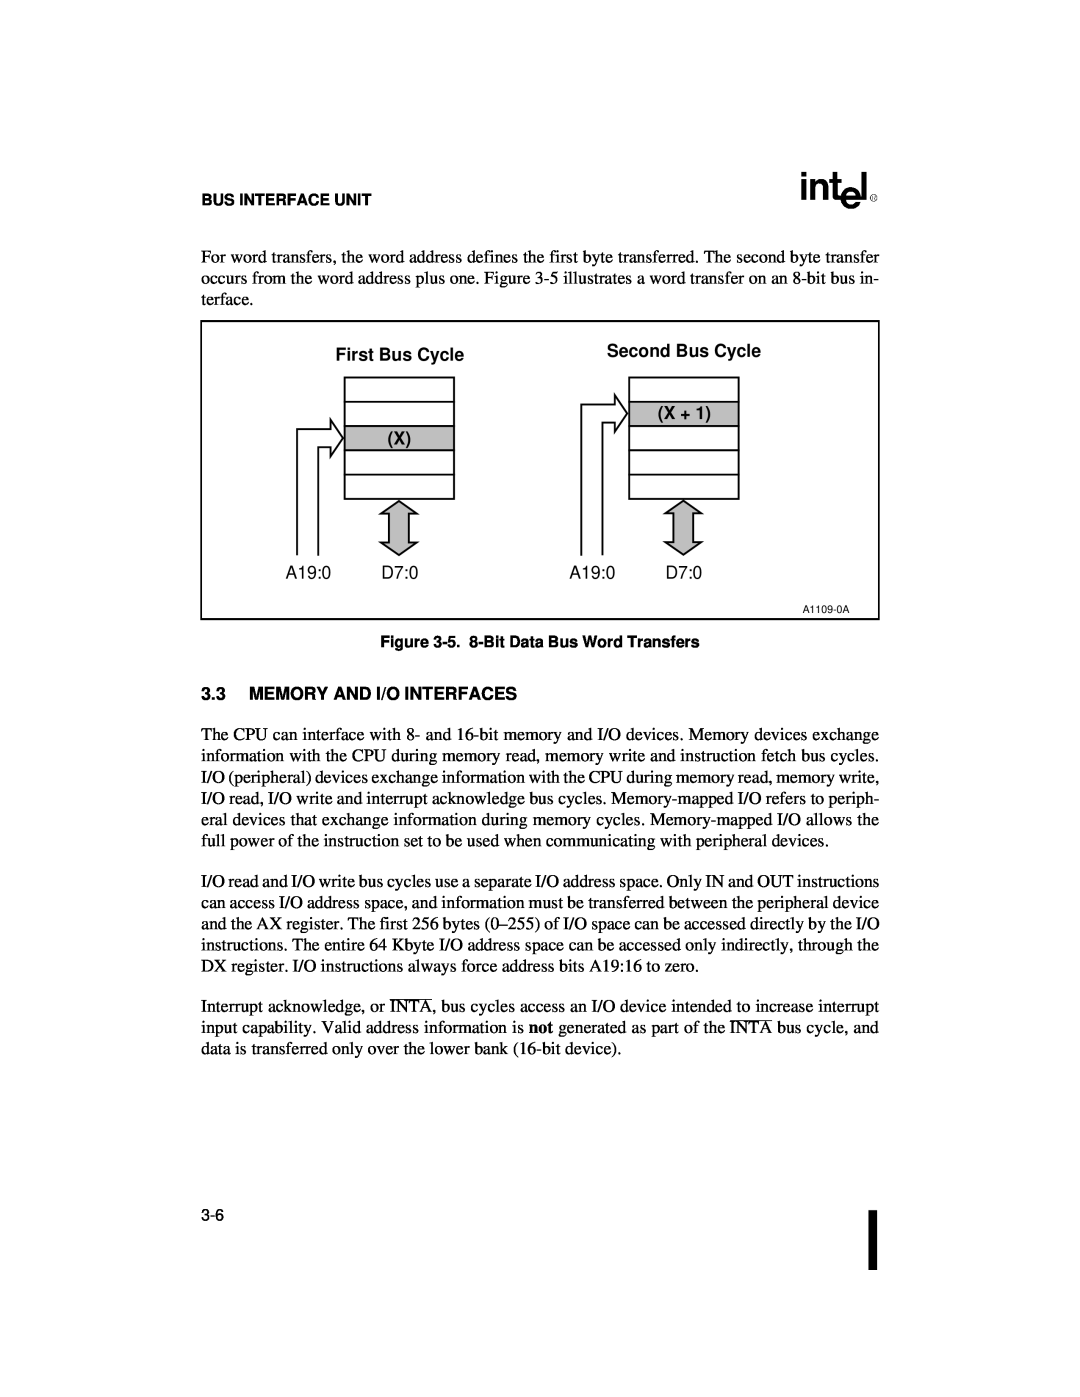 Intel 80C186XL, 80C188XL user manual A19:0, D7:0, 3.3MEMORY AND I/O INTERFACES, First Bus Cycle, X + X, Second Bus Cycle 